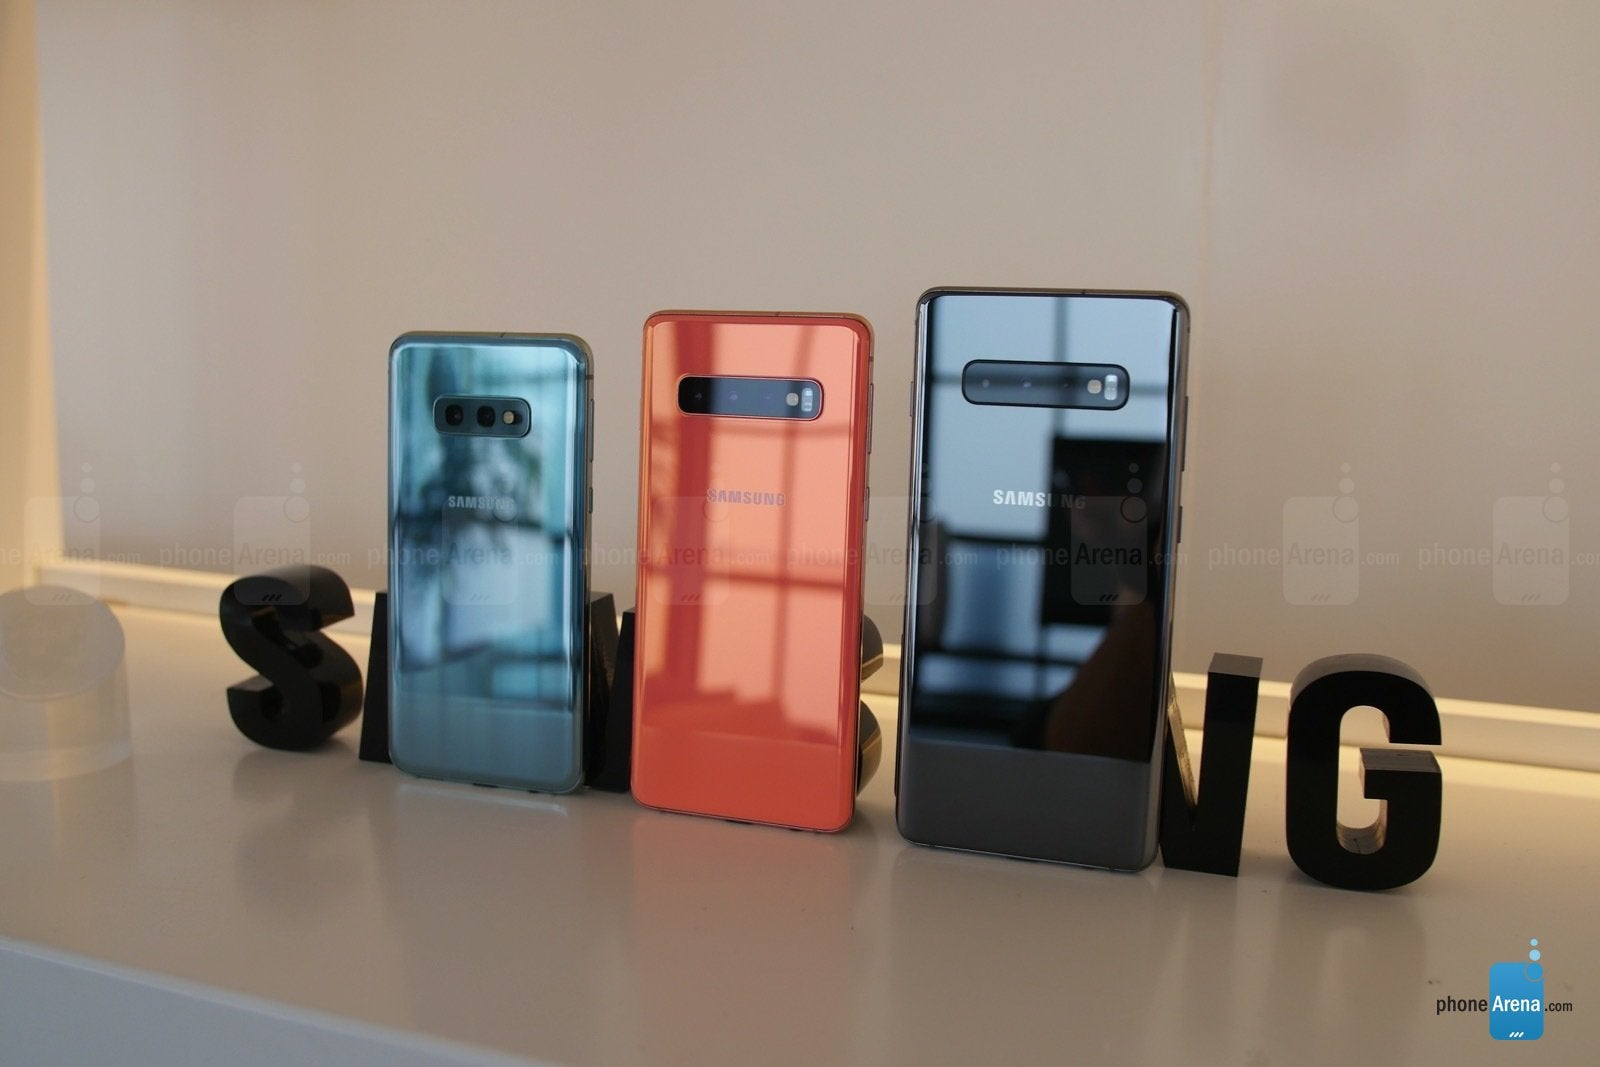 Left to right - S10e, S10, S10+ - Samsung Galaxy S10e hands-on: Big features in a smaller package